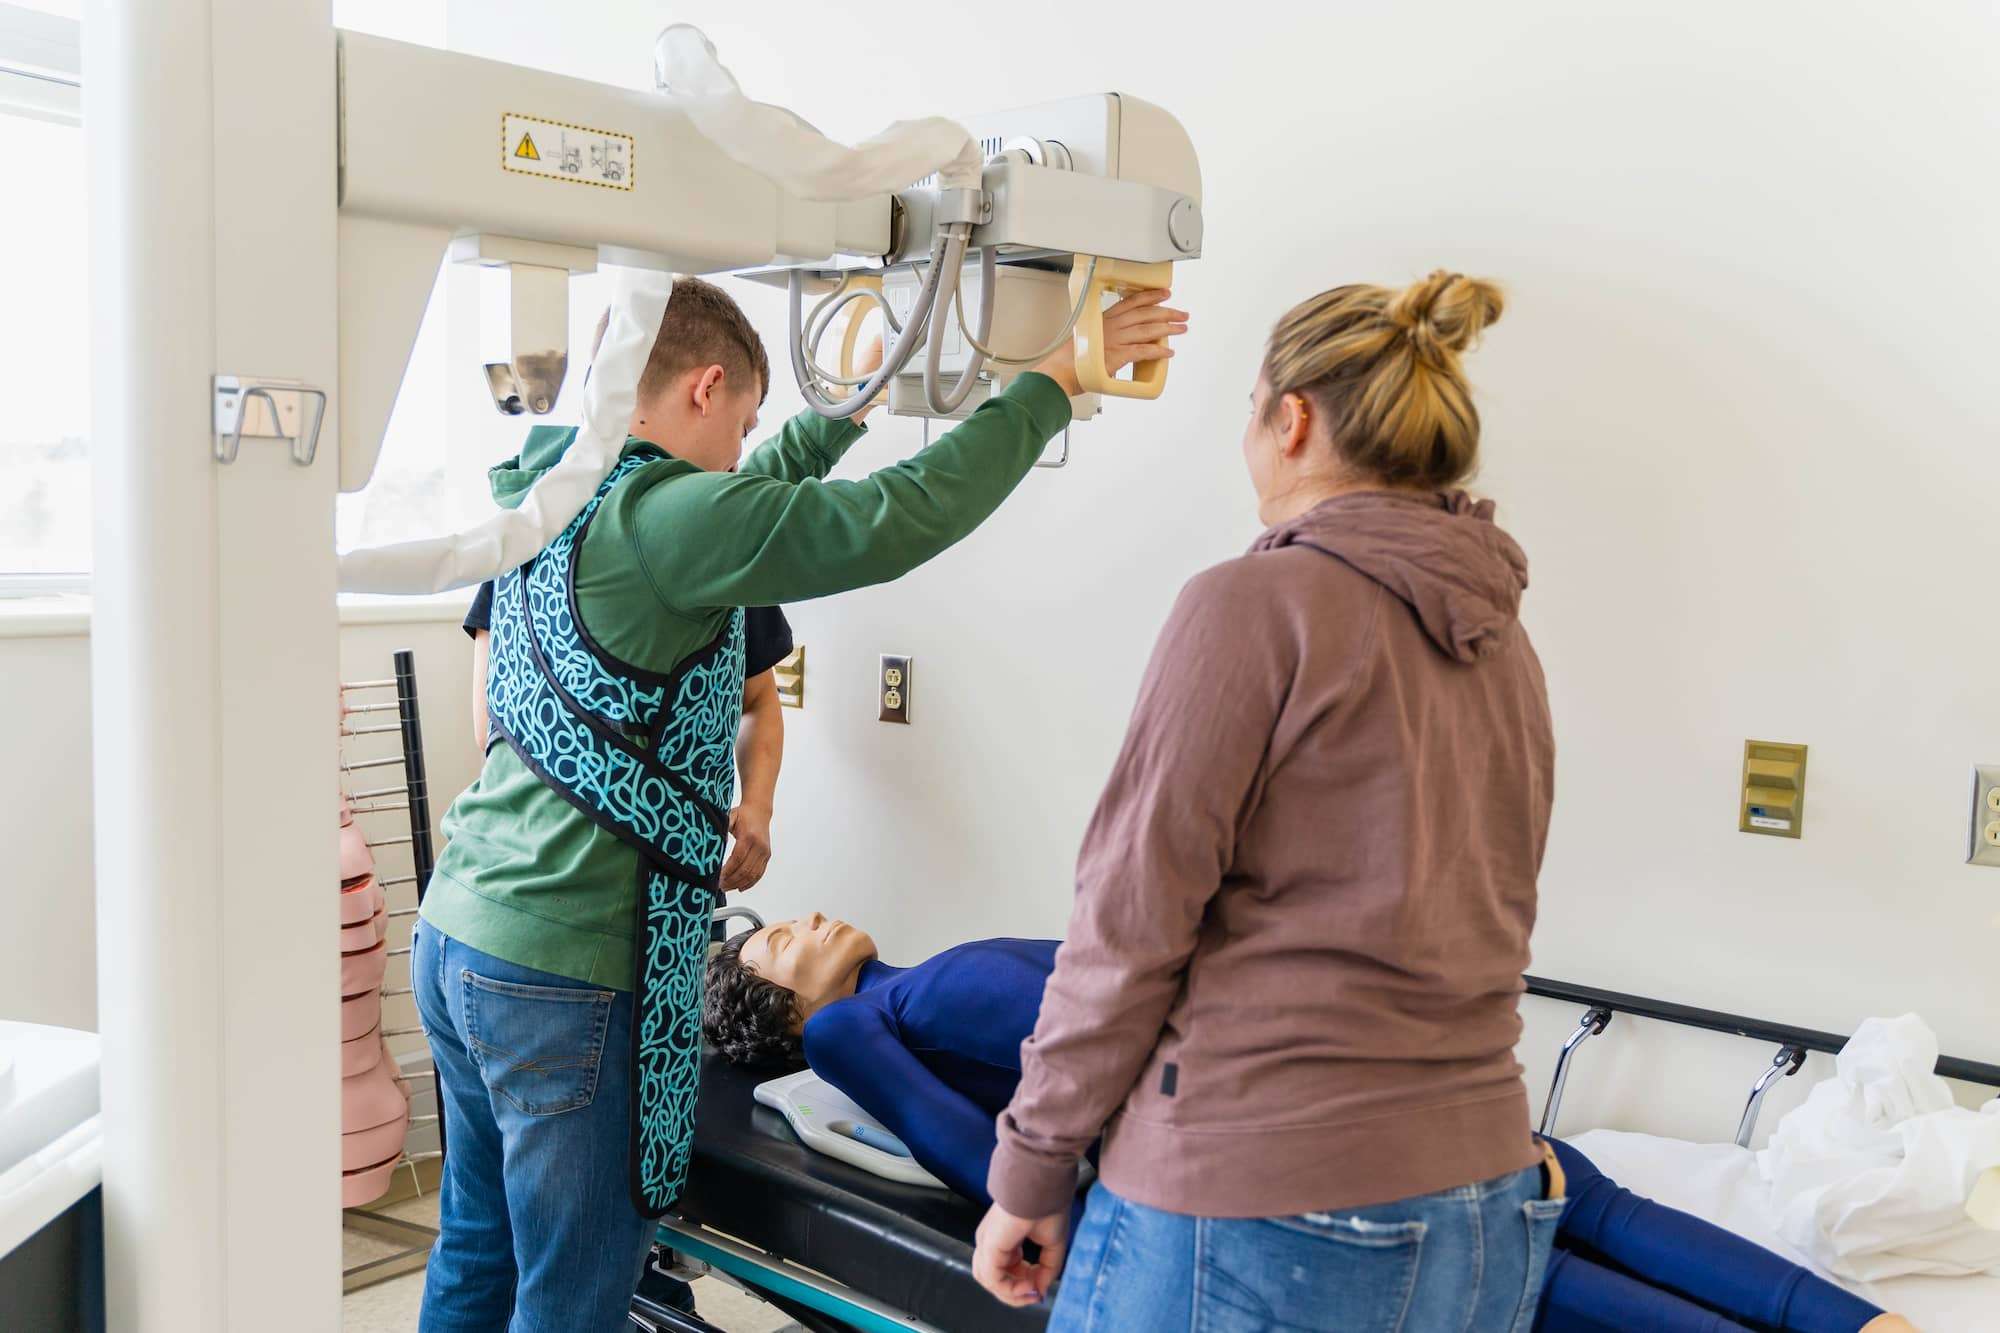 A student positions a radiography system over a mannequin.